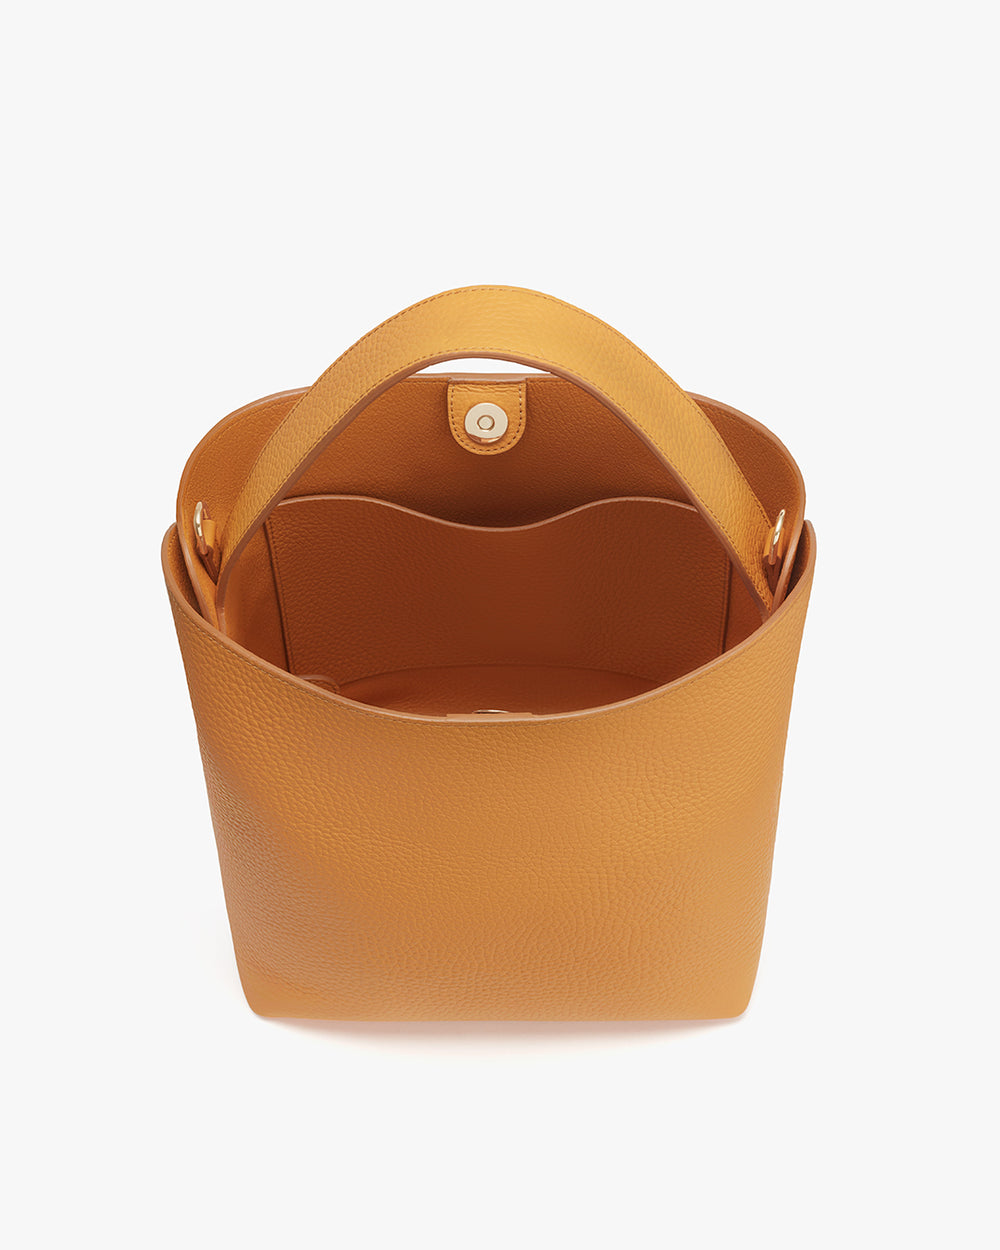 Open top handbag with rounded handles and interior pocket